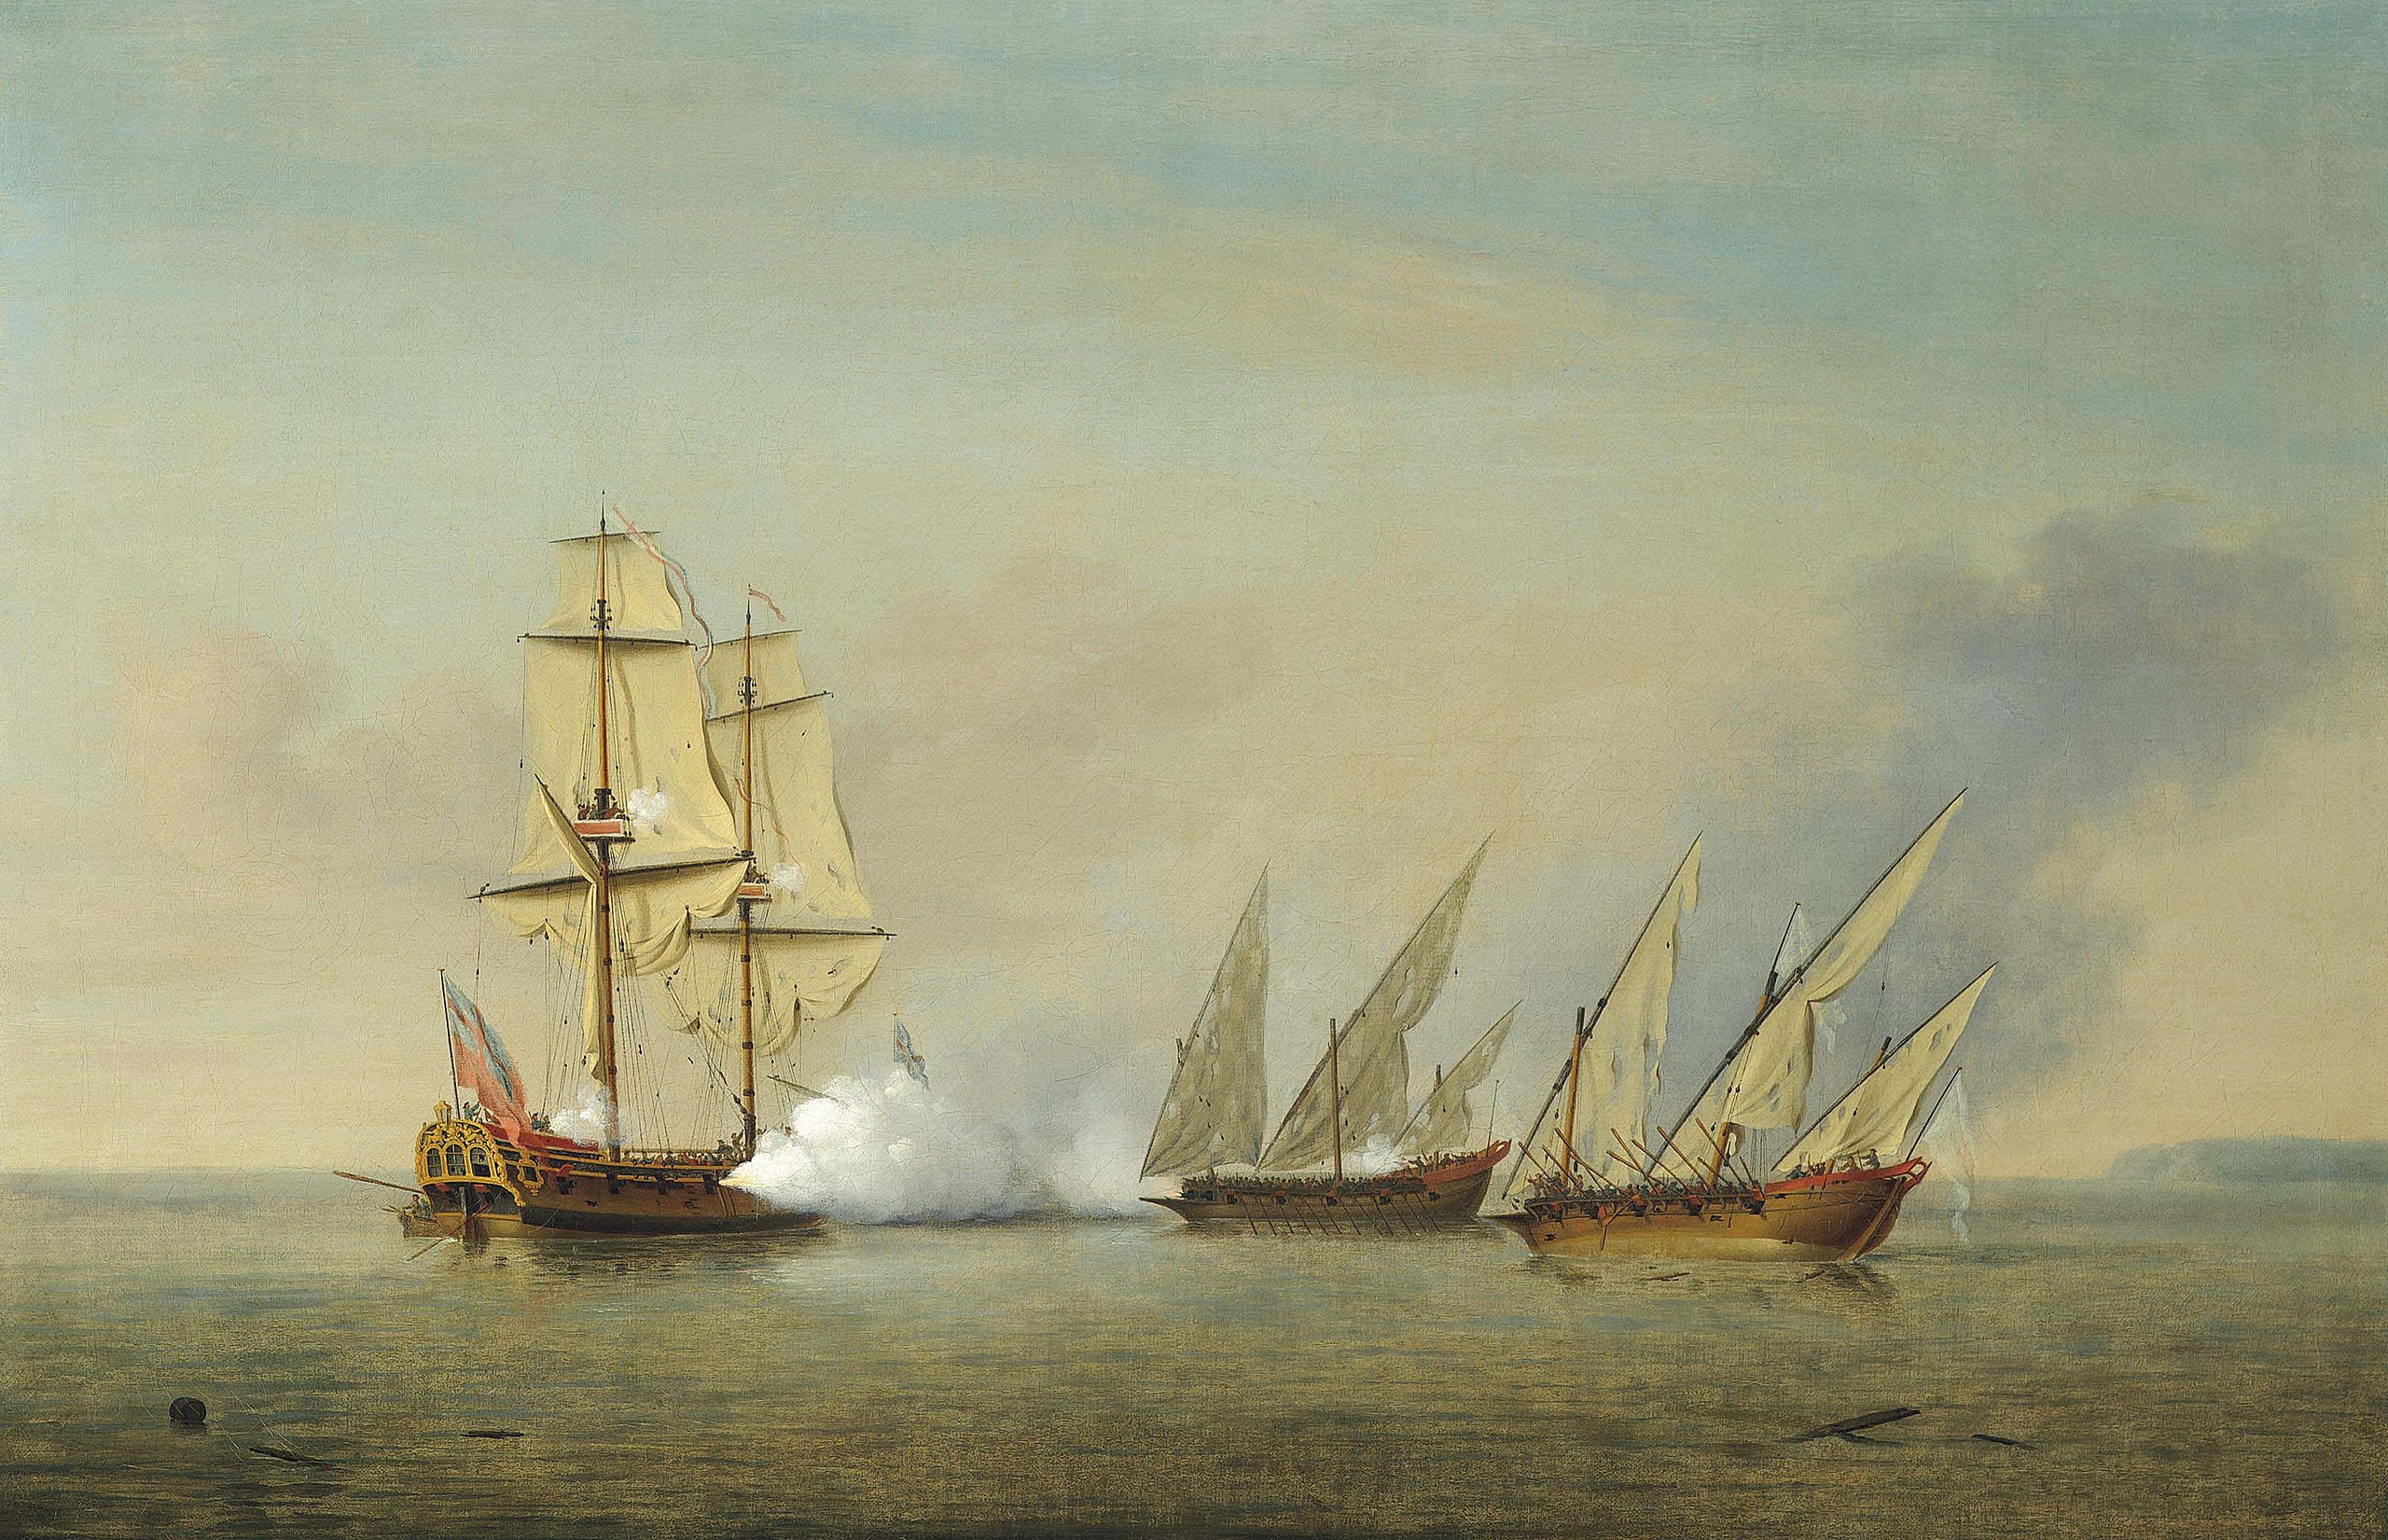 A Royal Navy sloop, H.M.S. Greyhound, in action with two heavily-armed Spanish galleys